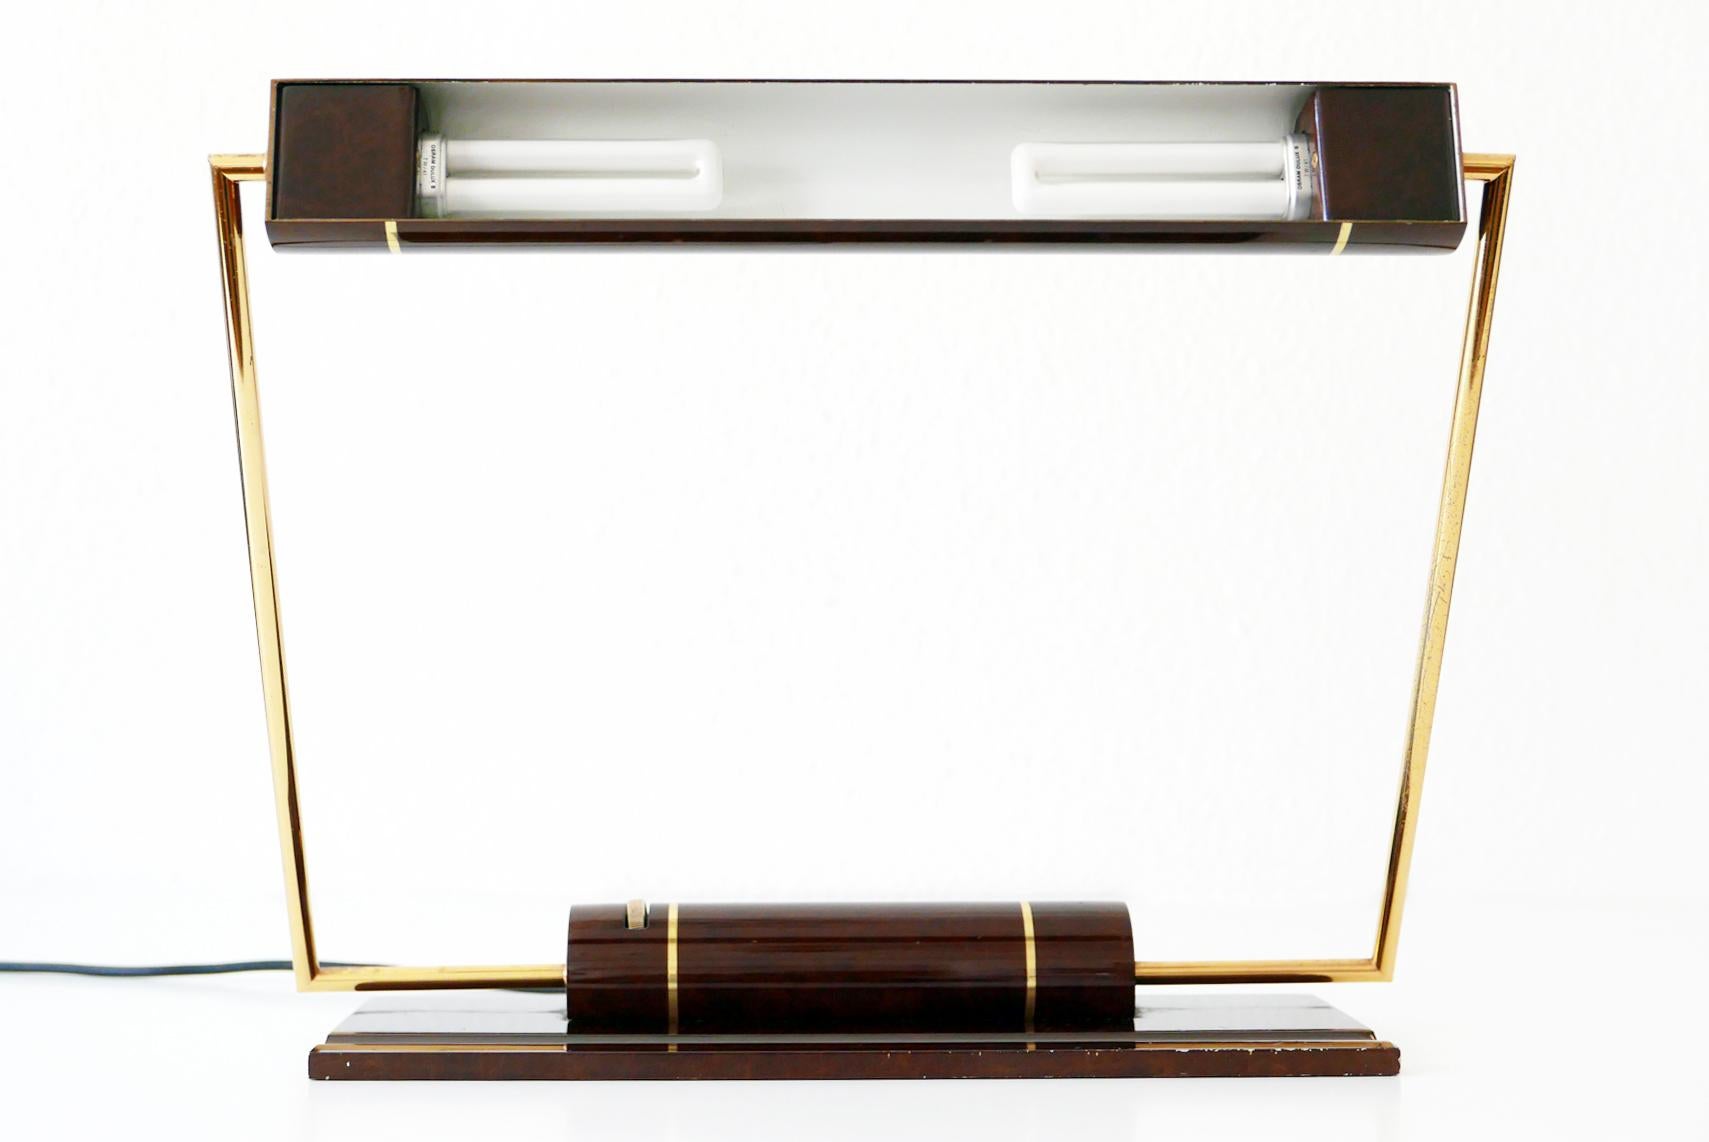 Enameled Exceptional Modernist Banker Desk Light or Table Lamp by George Kovacs USA 1980s